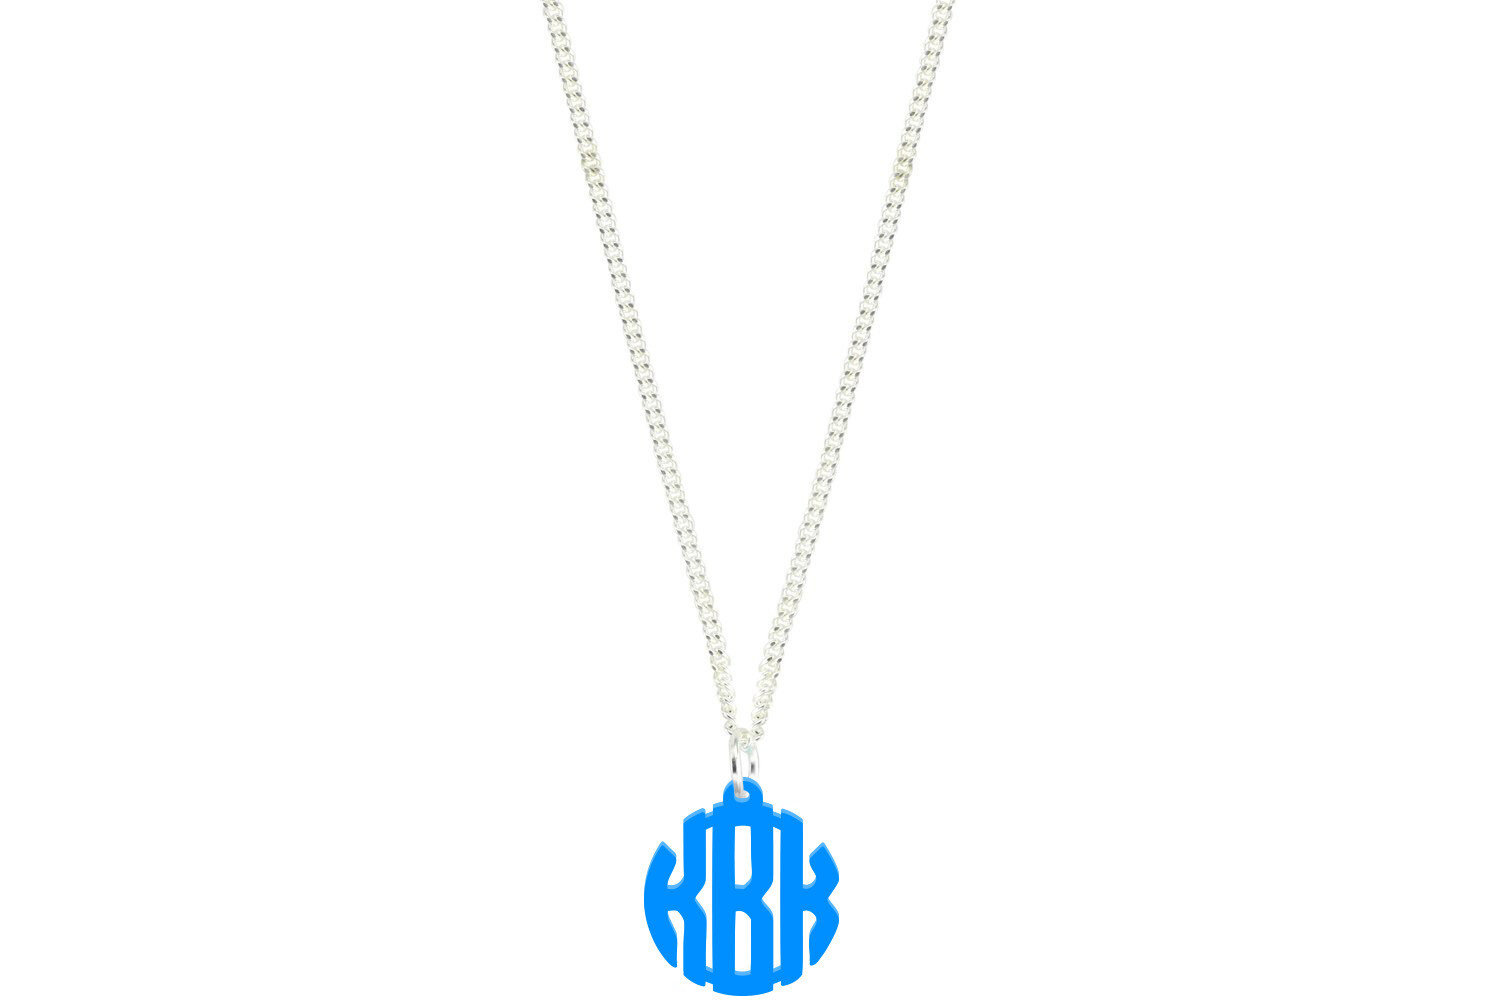 Clean Block Monogram with Chain Necklace